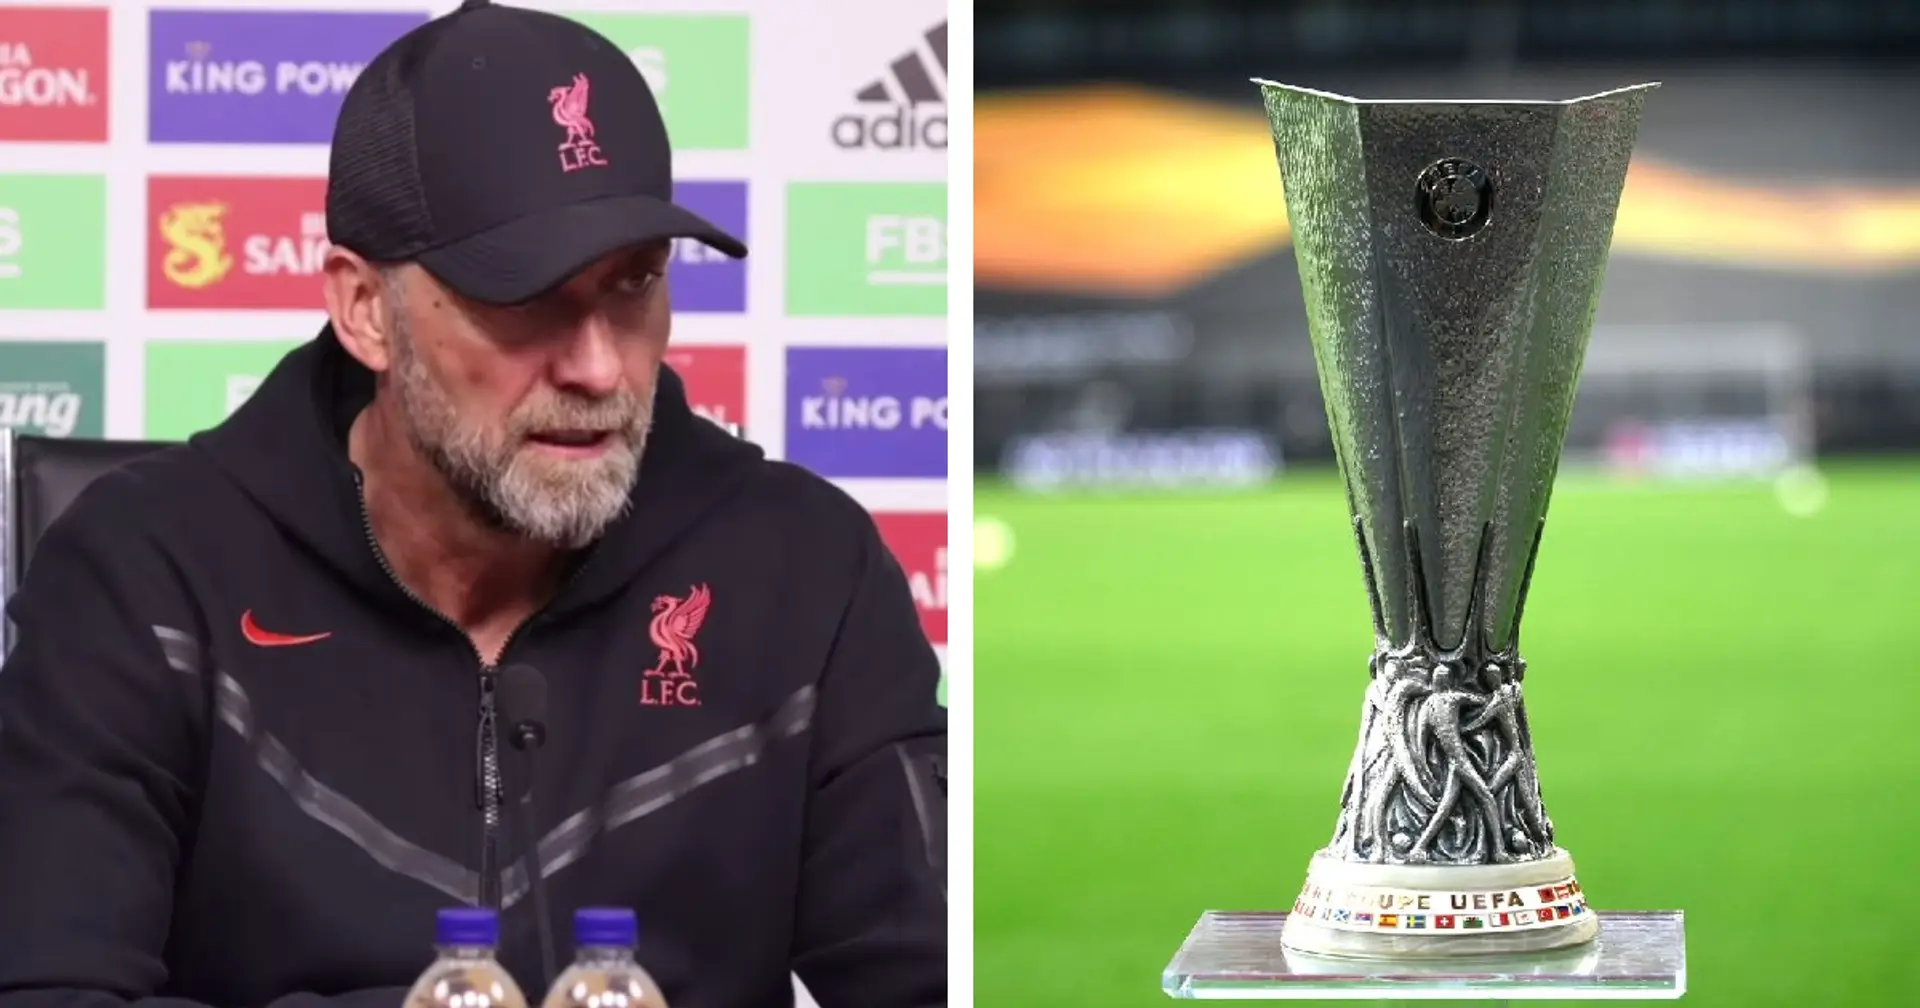 Liverpool qualify for Europa League – Klopp says he didn't believe it could happen 6 weeks ago